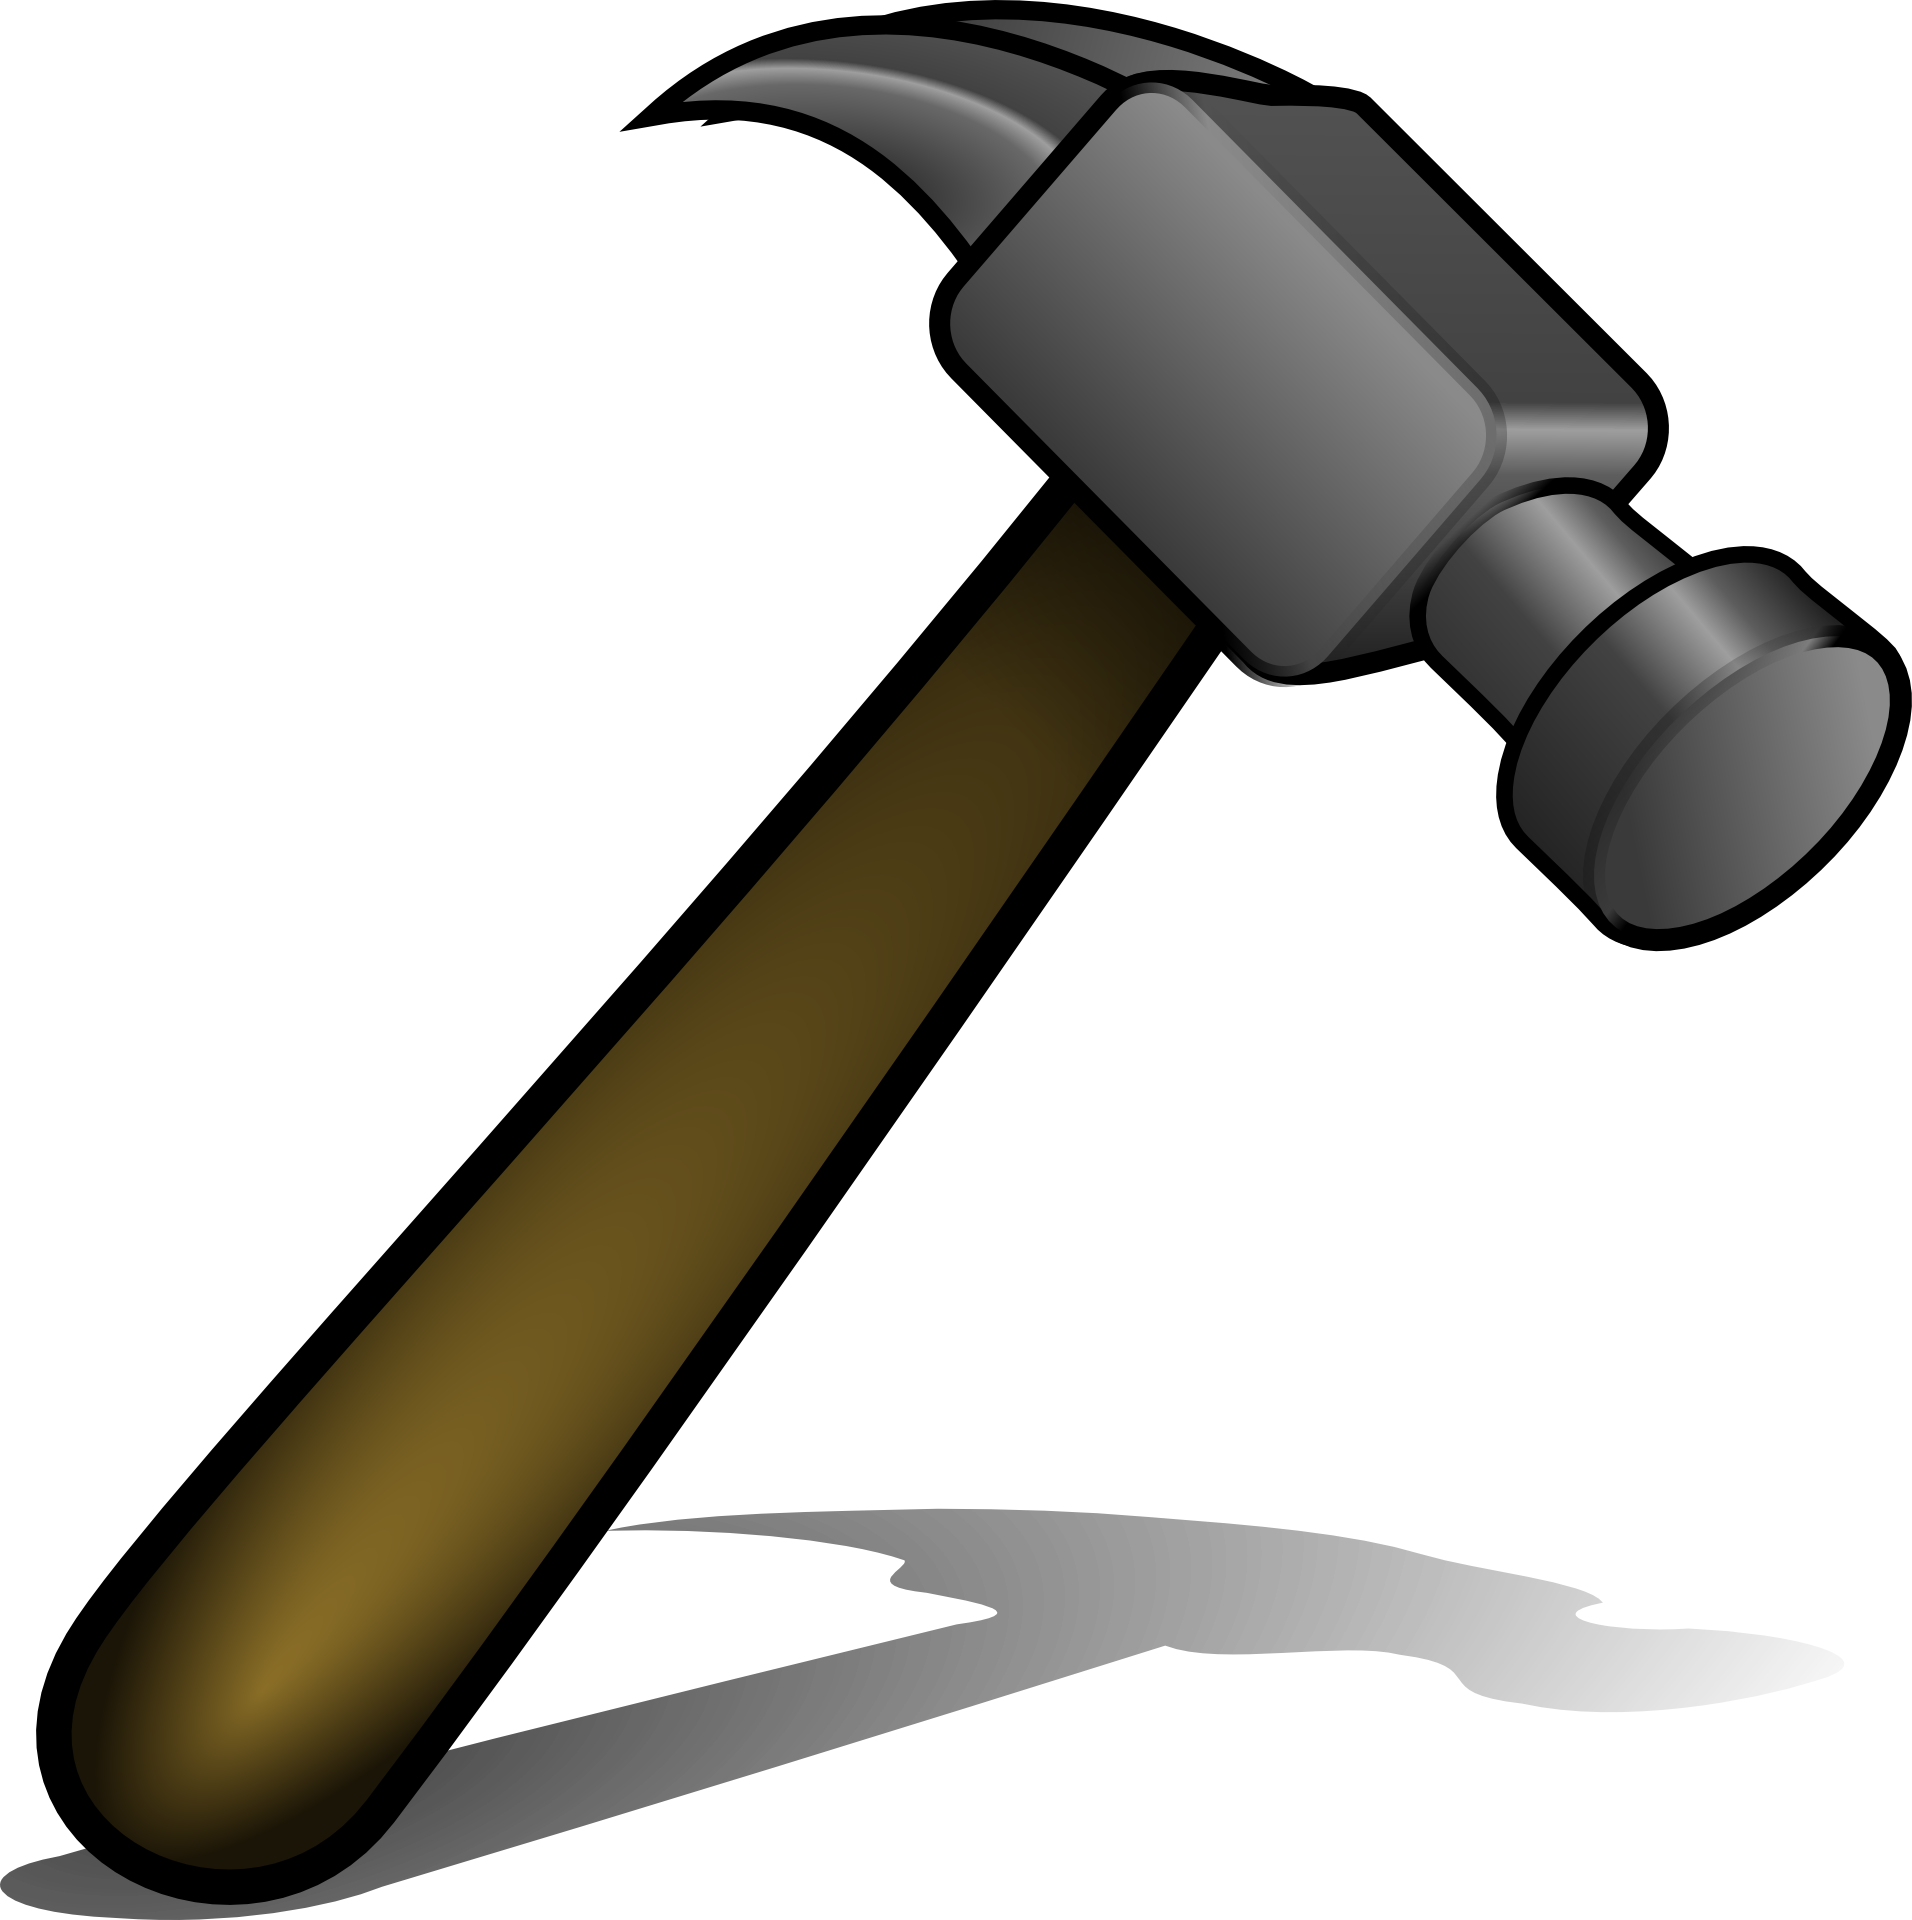 Hammer as a drawing free image download